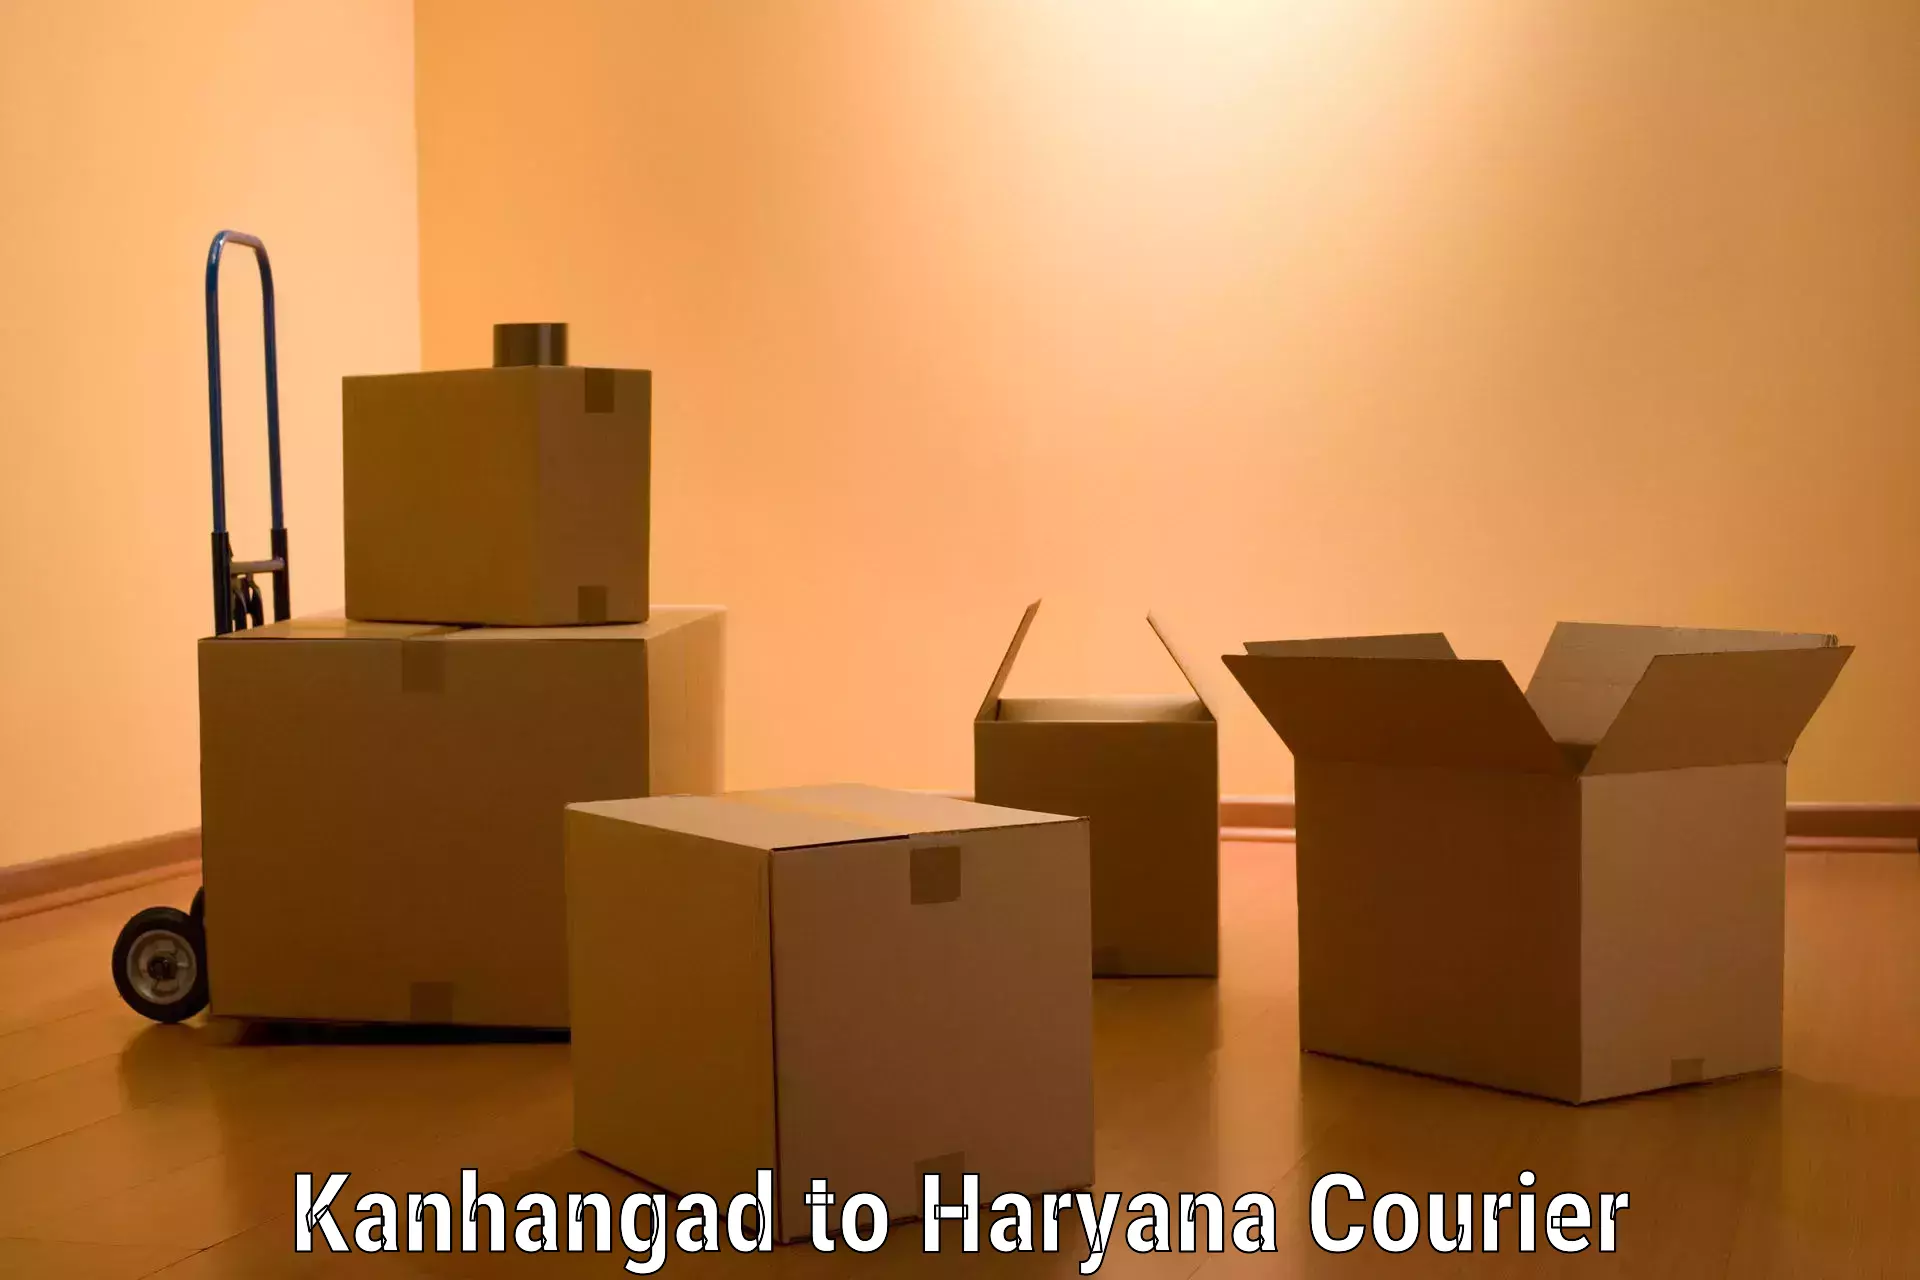 Home moving specialists Kanhangad to Gurgaon